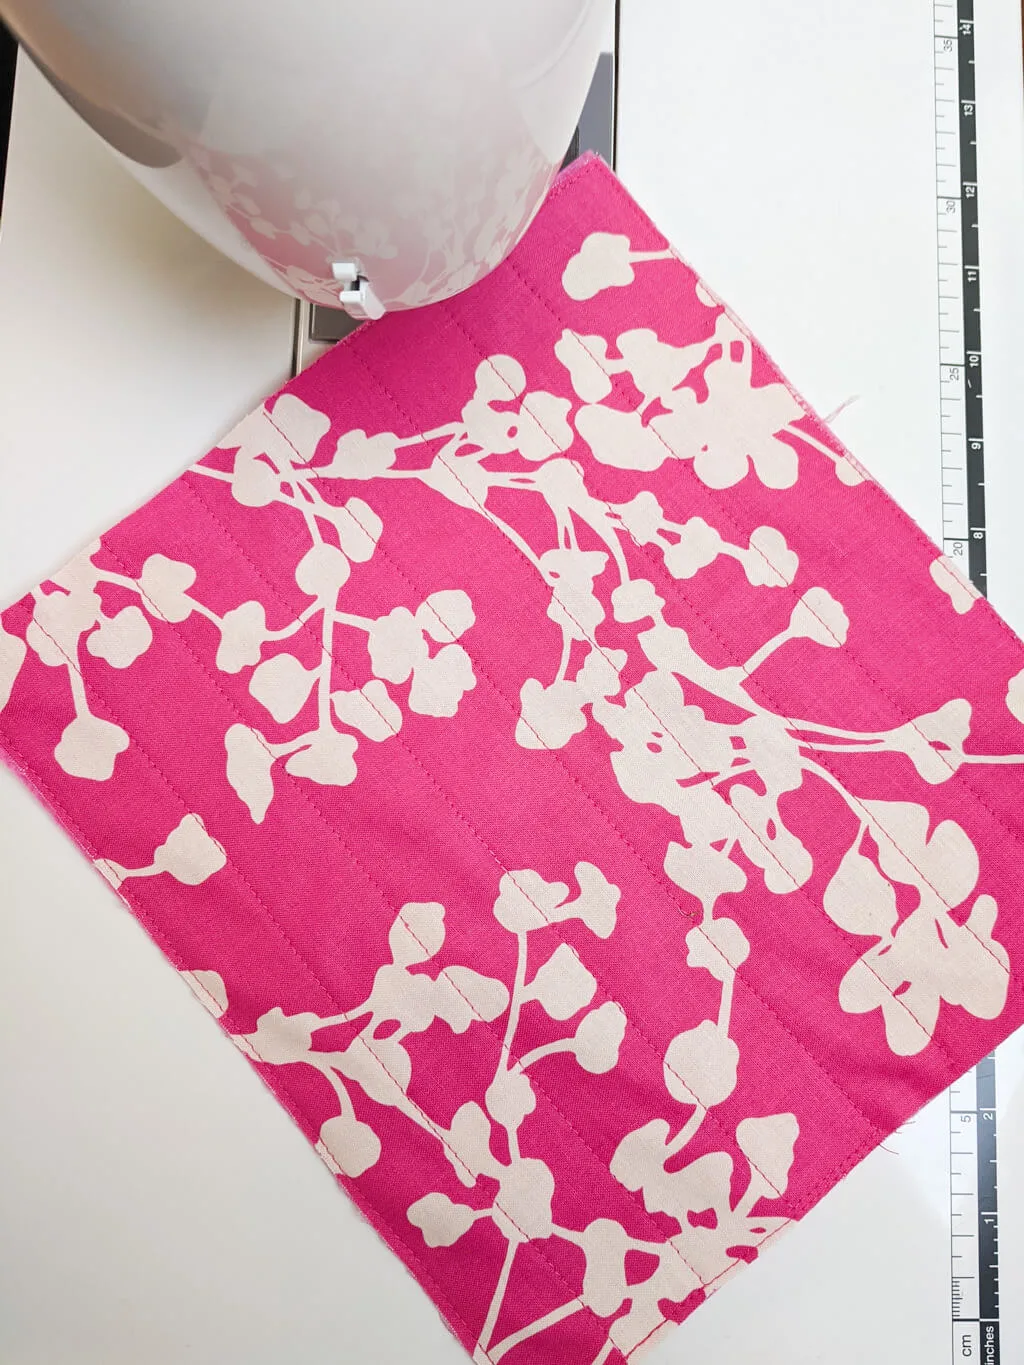 Quilting the outside of a pencil case fabric